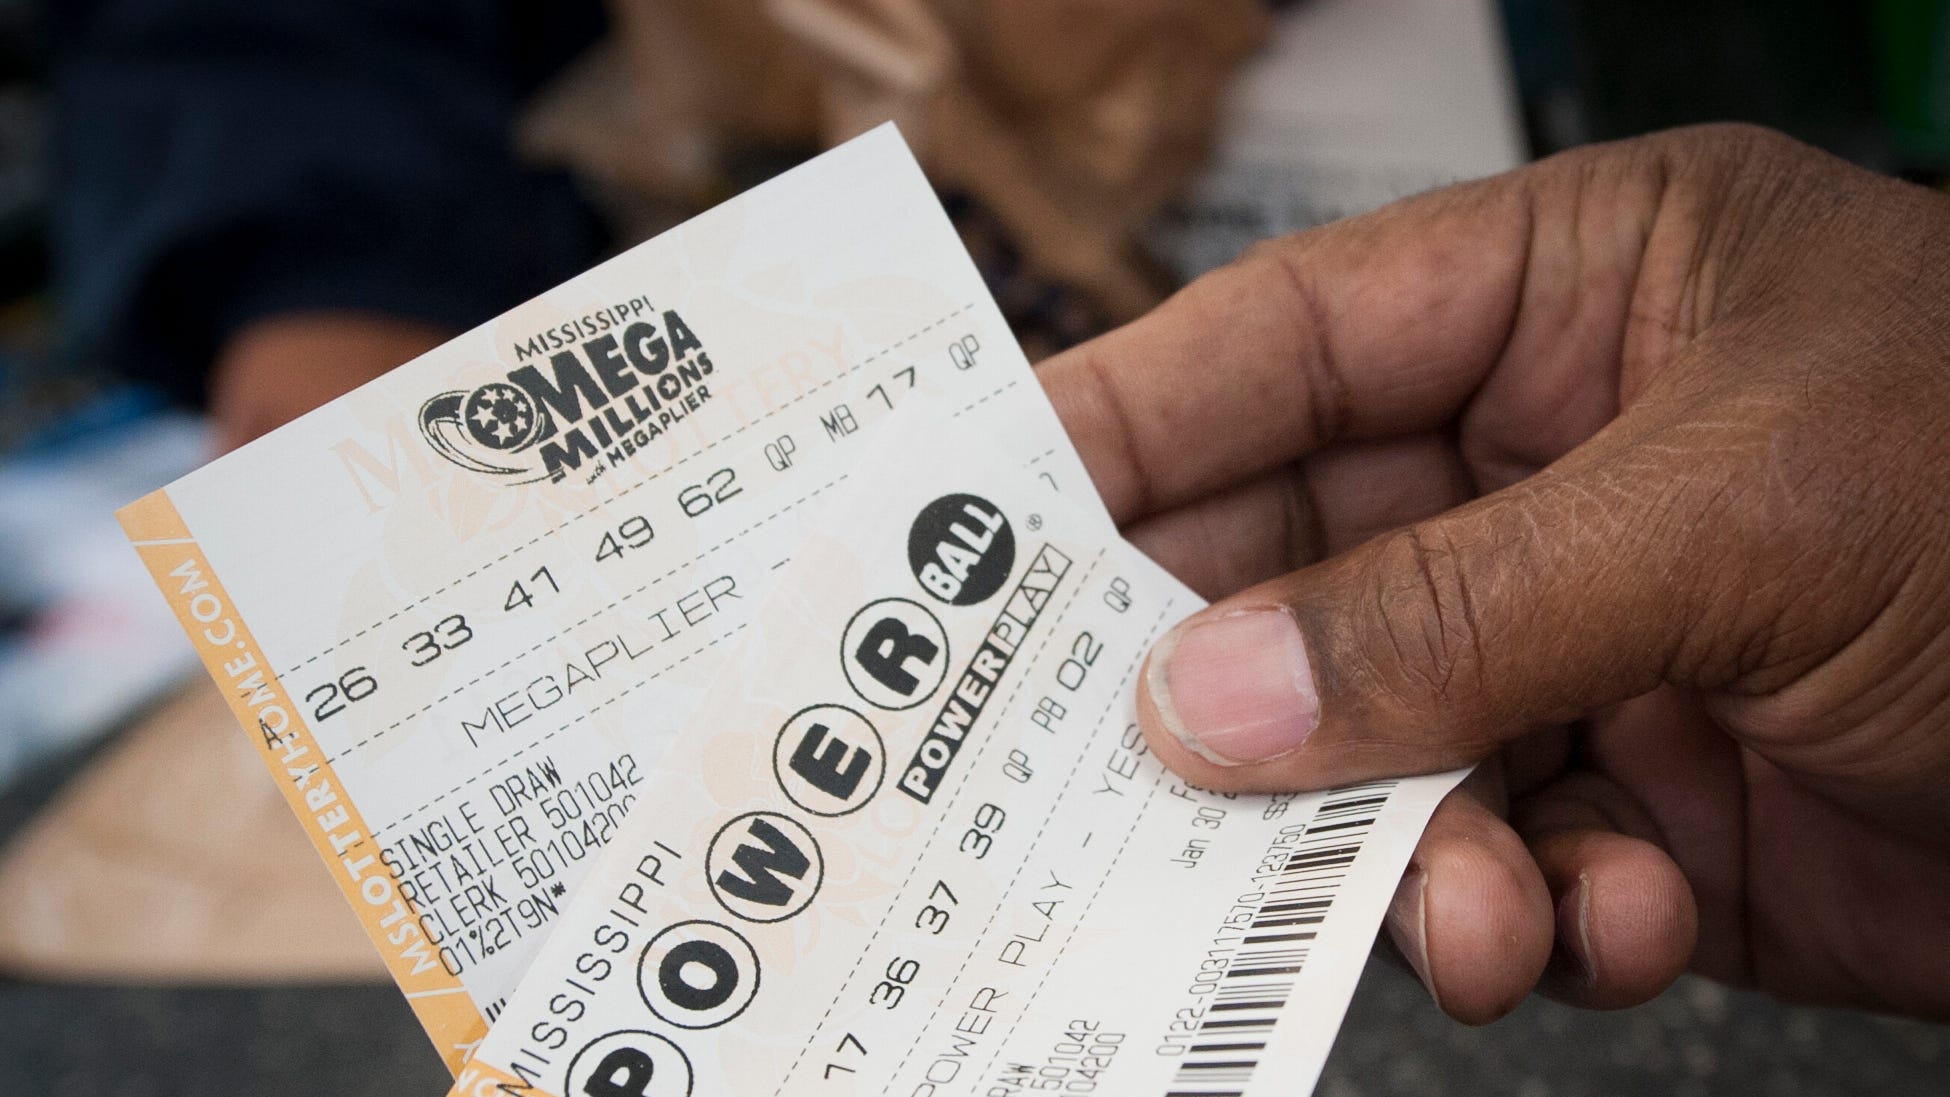 Local university president bought a lottery ticket worth $1 million. Then forgot about it.